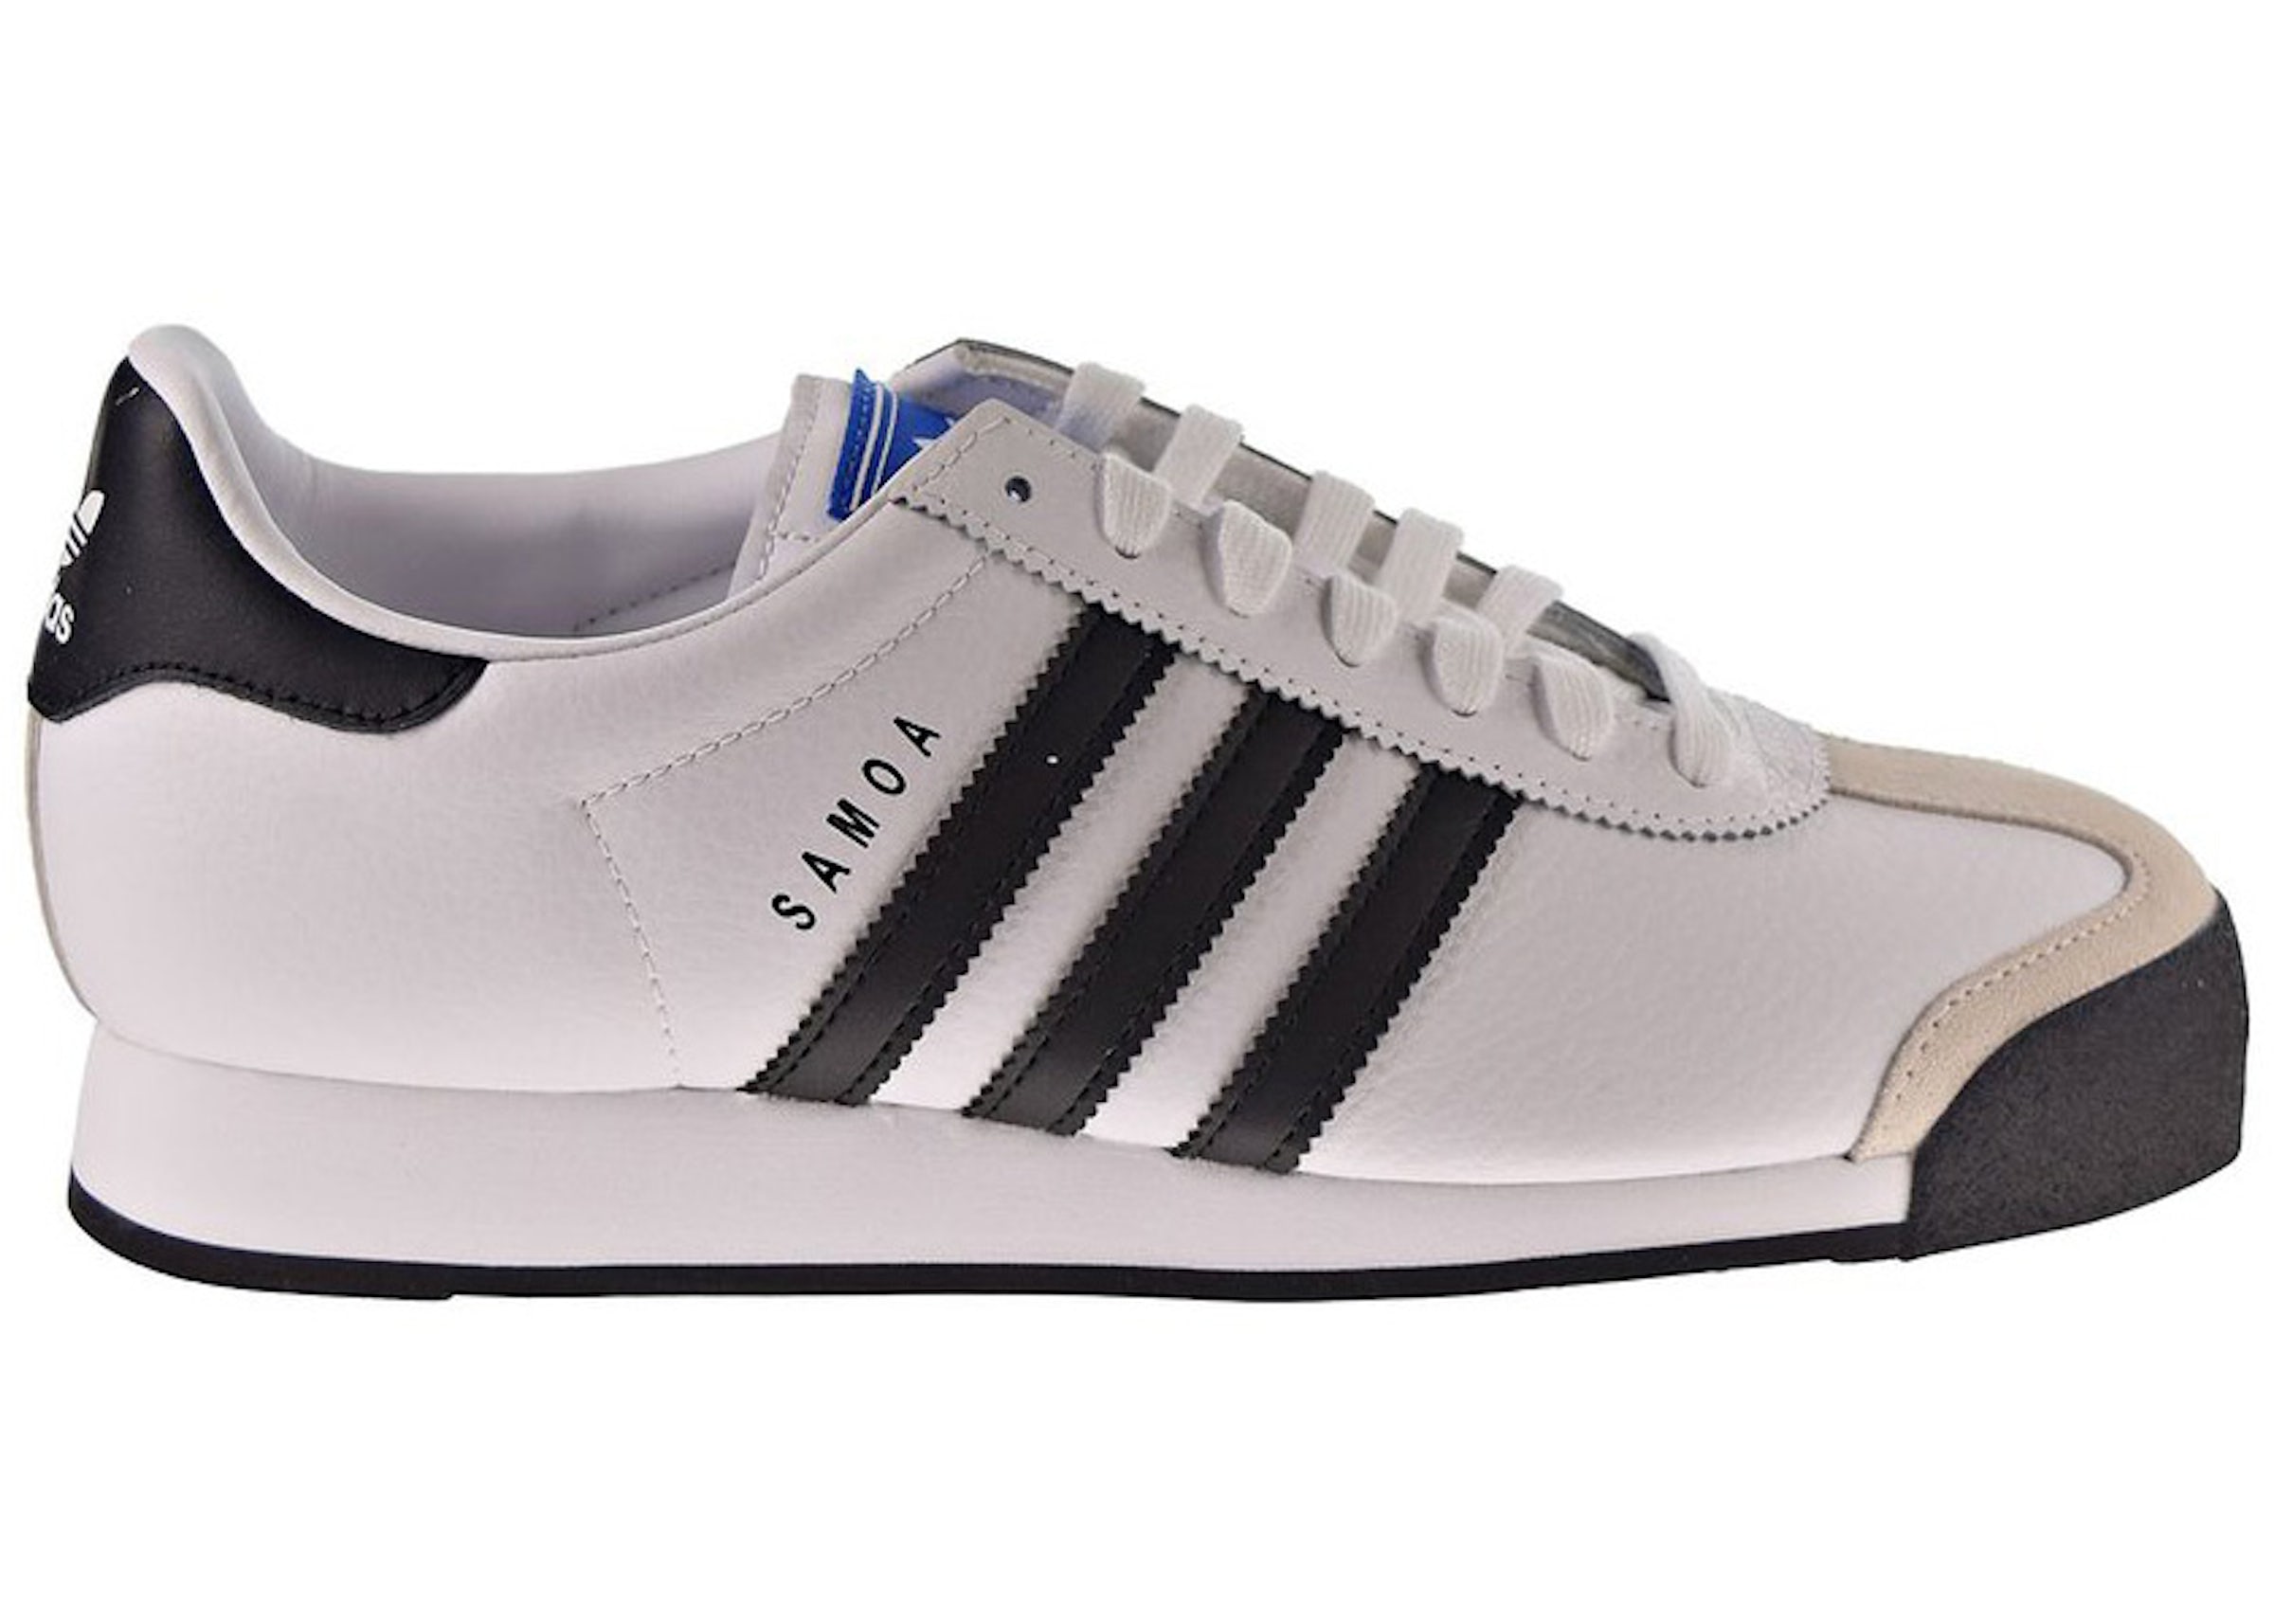 adidas New Other - & Shoes Sneakers Buy StockX